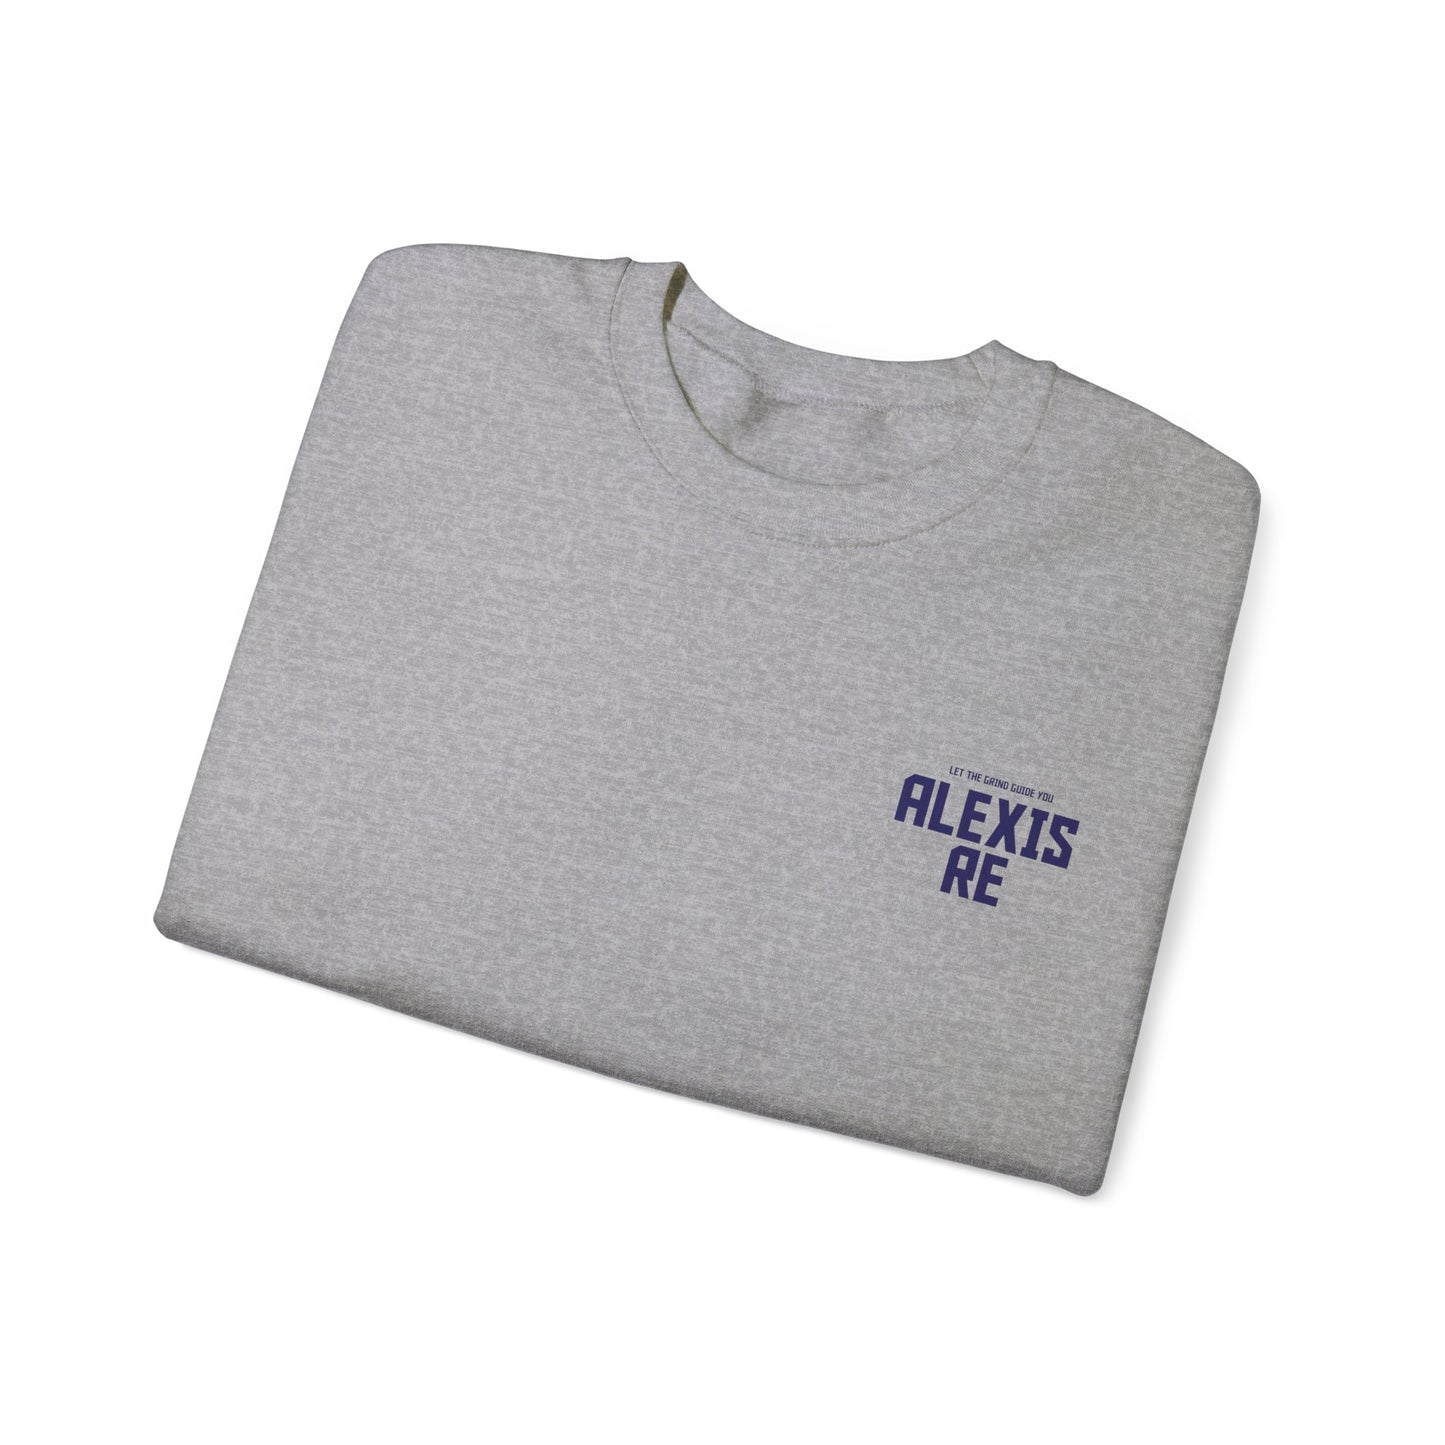 Alexis Re: Let The Grind Guide You Crewneck